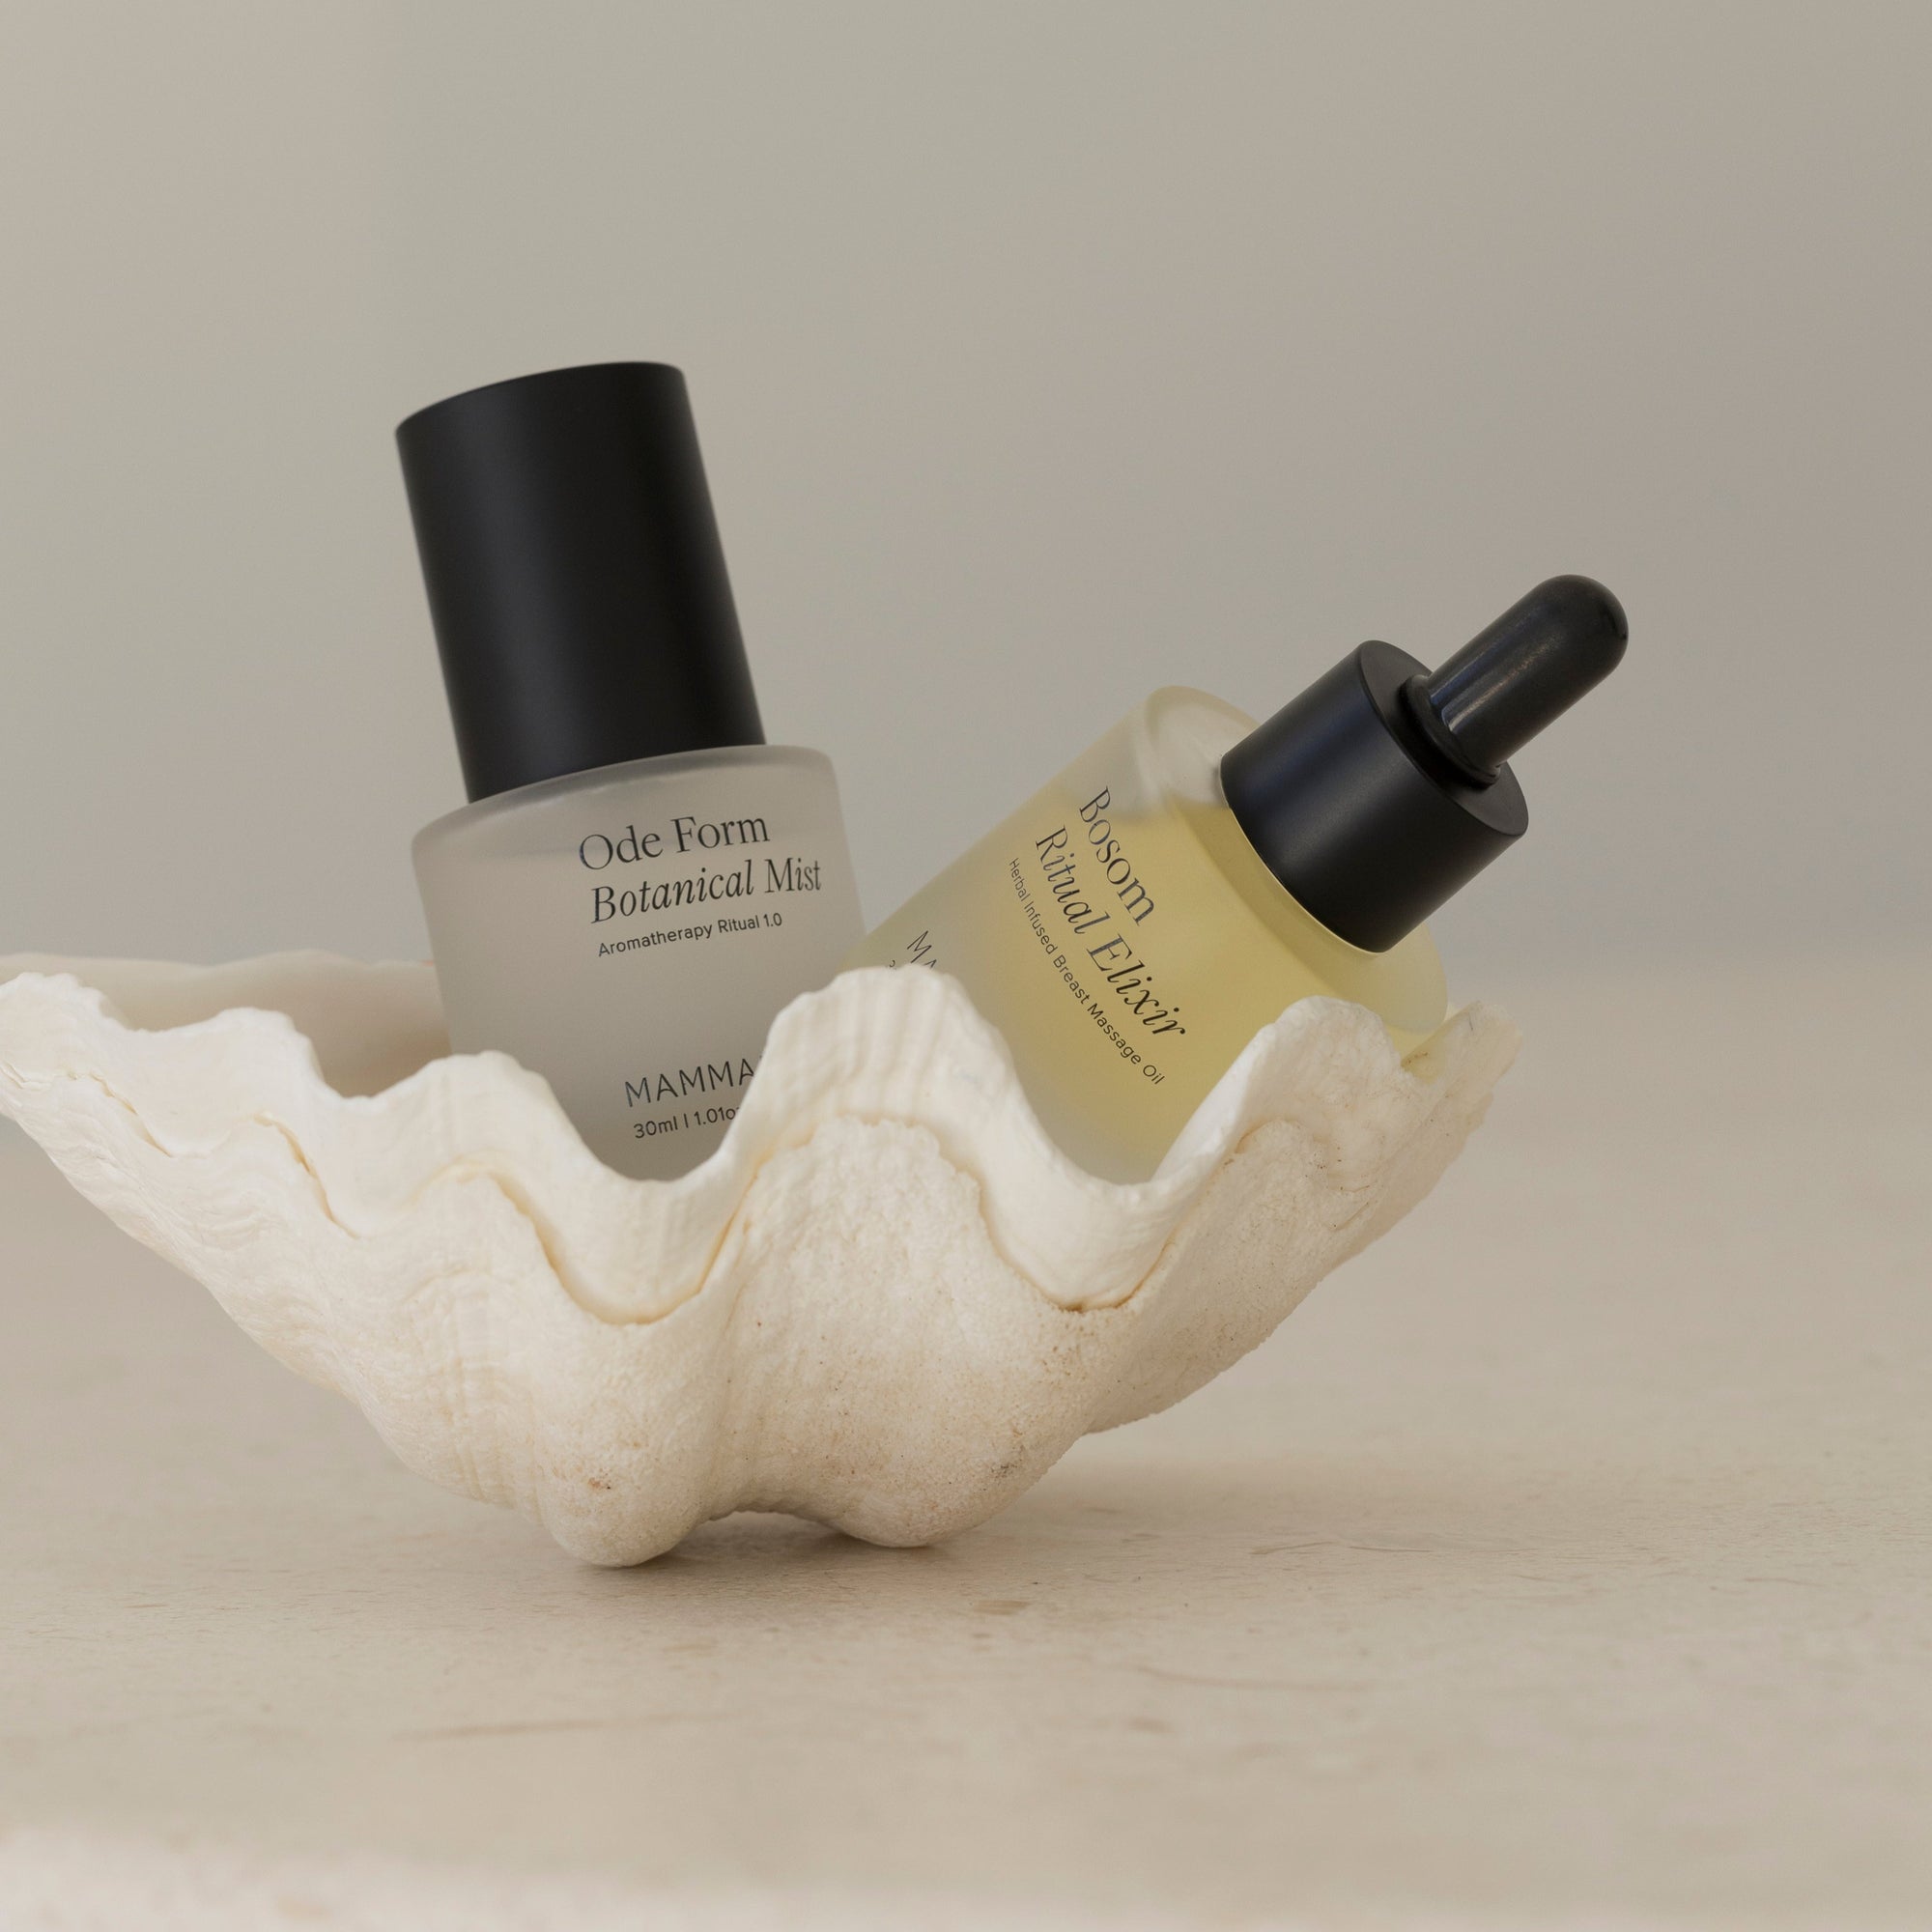 A bottle of Mammae EXCLUSIVE mini ode form botanical mist and a shell on a table.